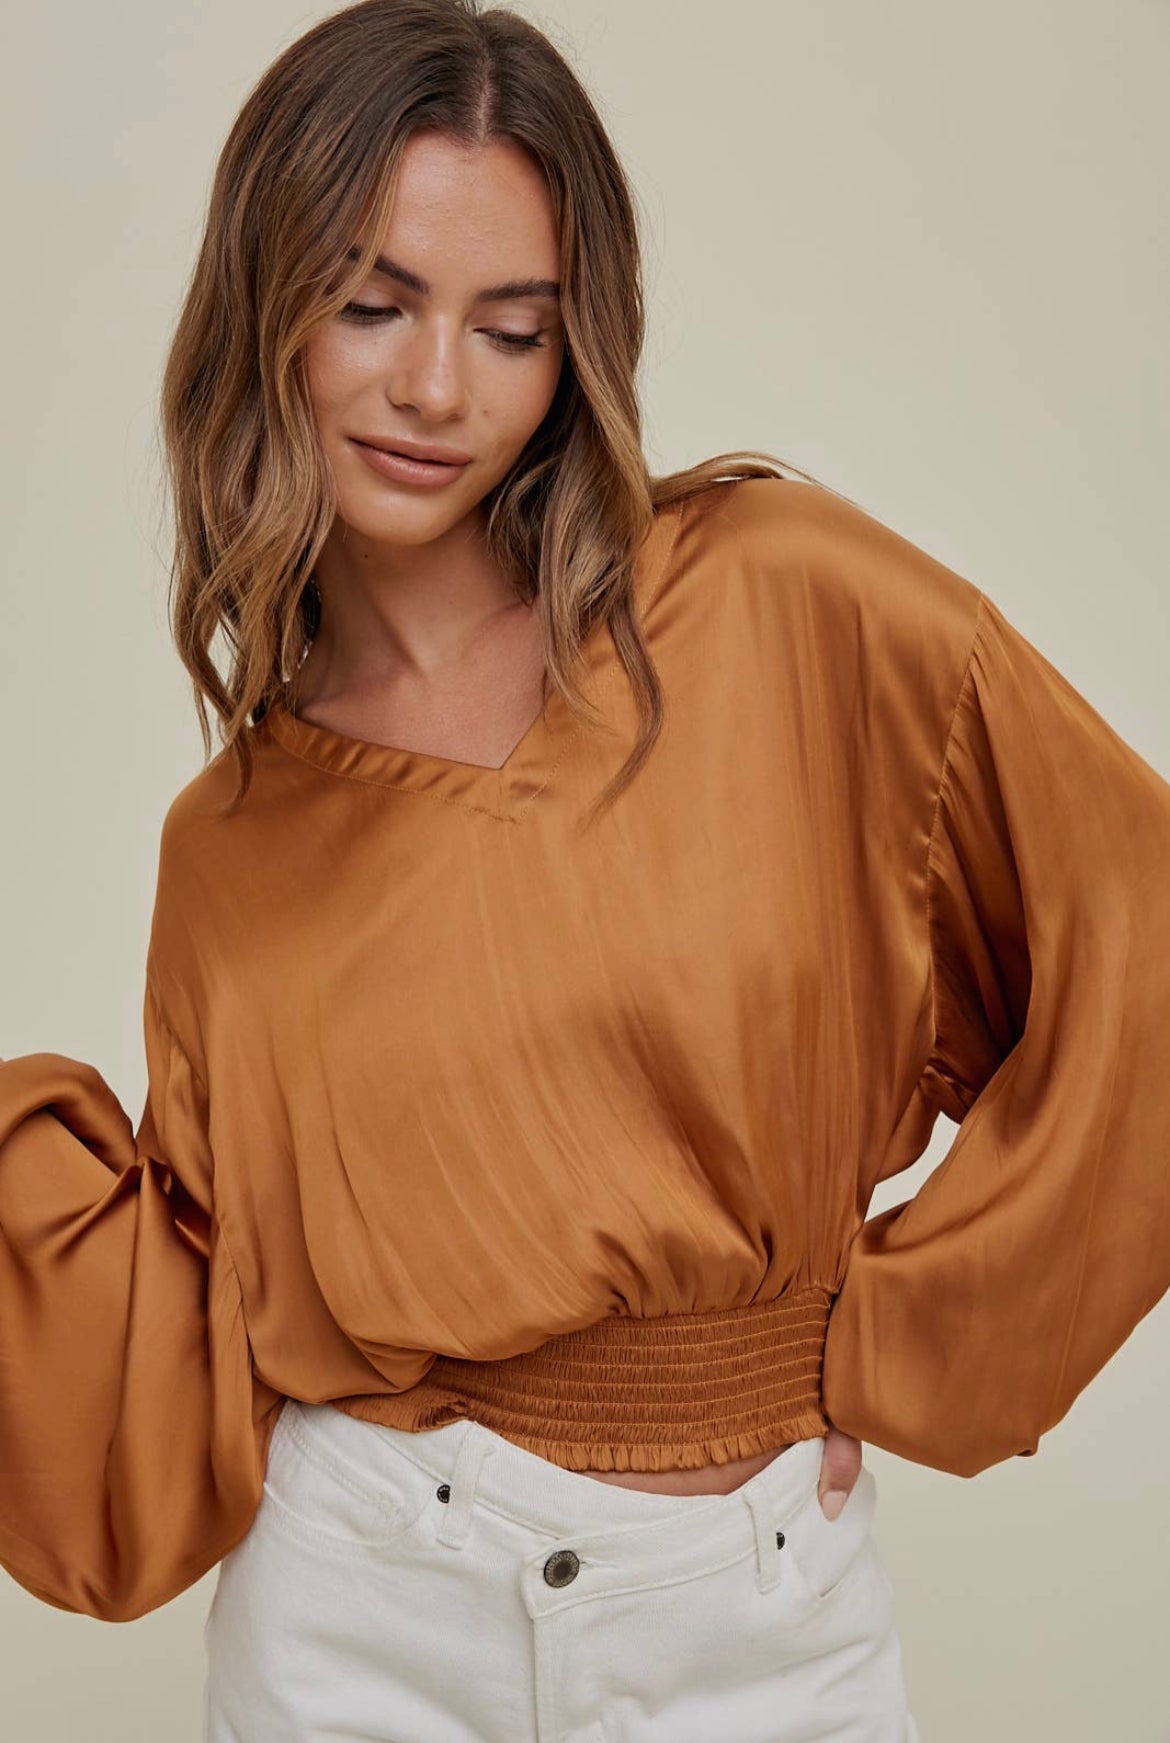 The Rust Top